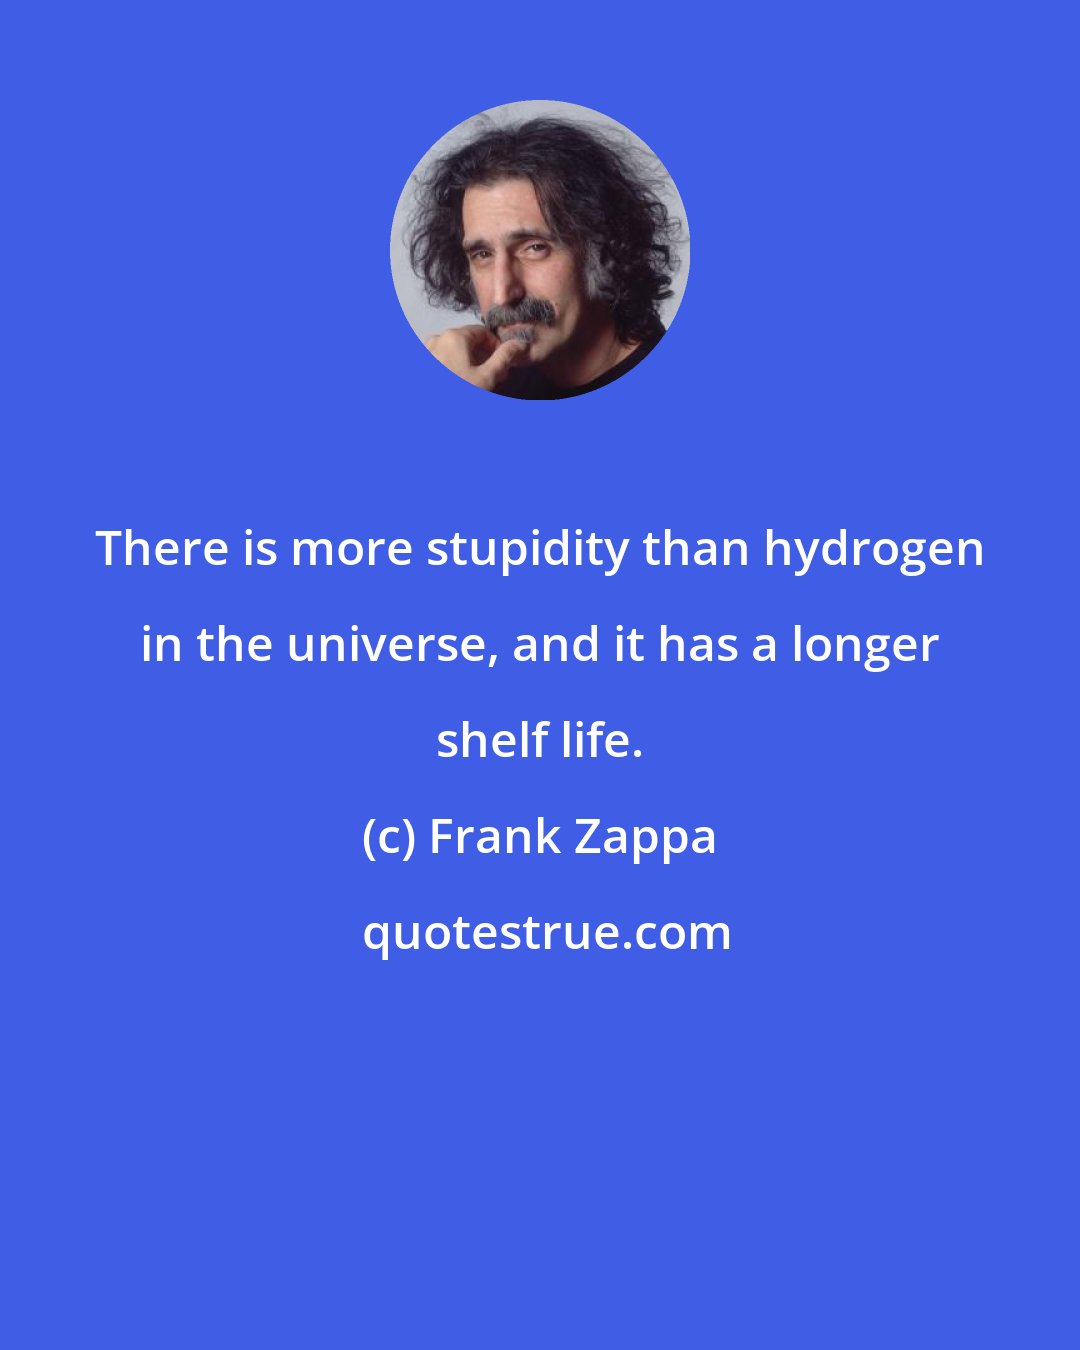 Frank Zappa: There is more stupidity than hydrogen in the universe, and it has a longer shelf life.